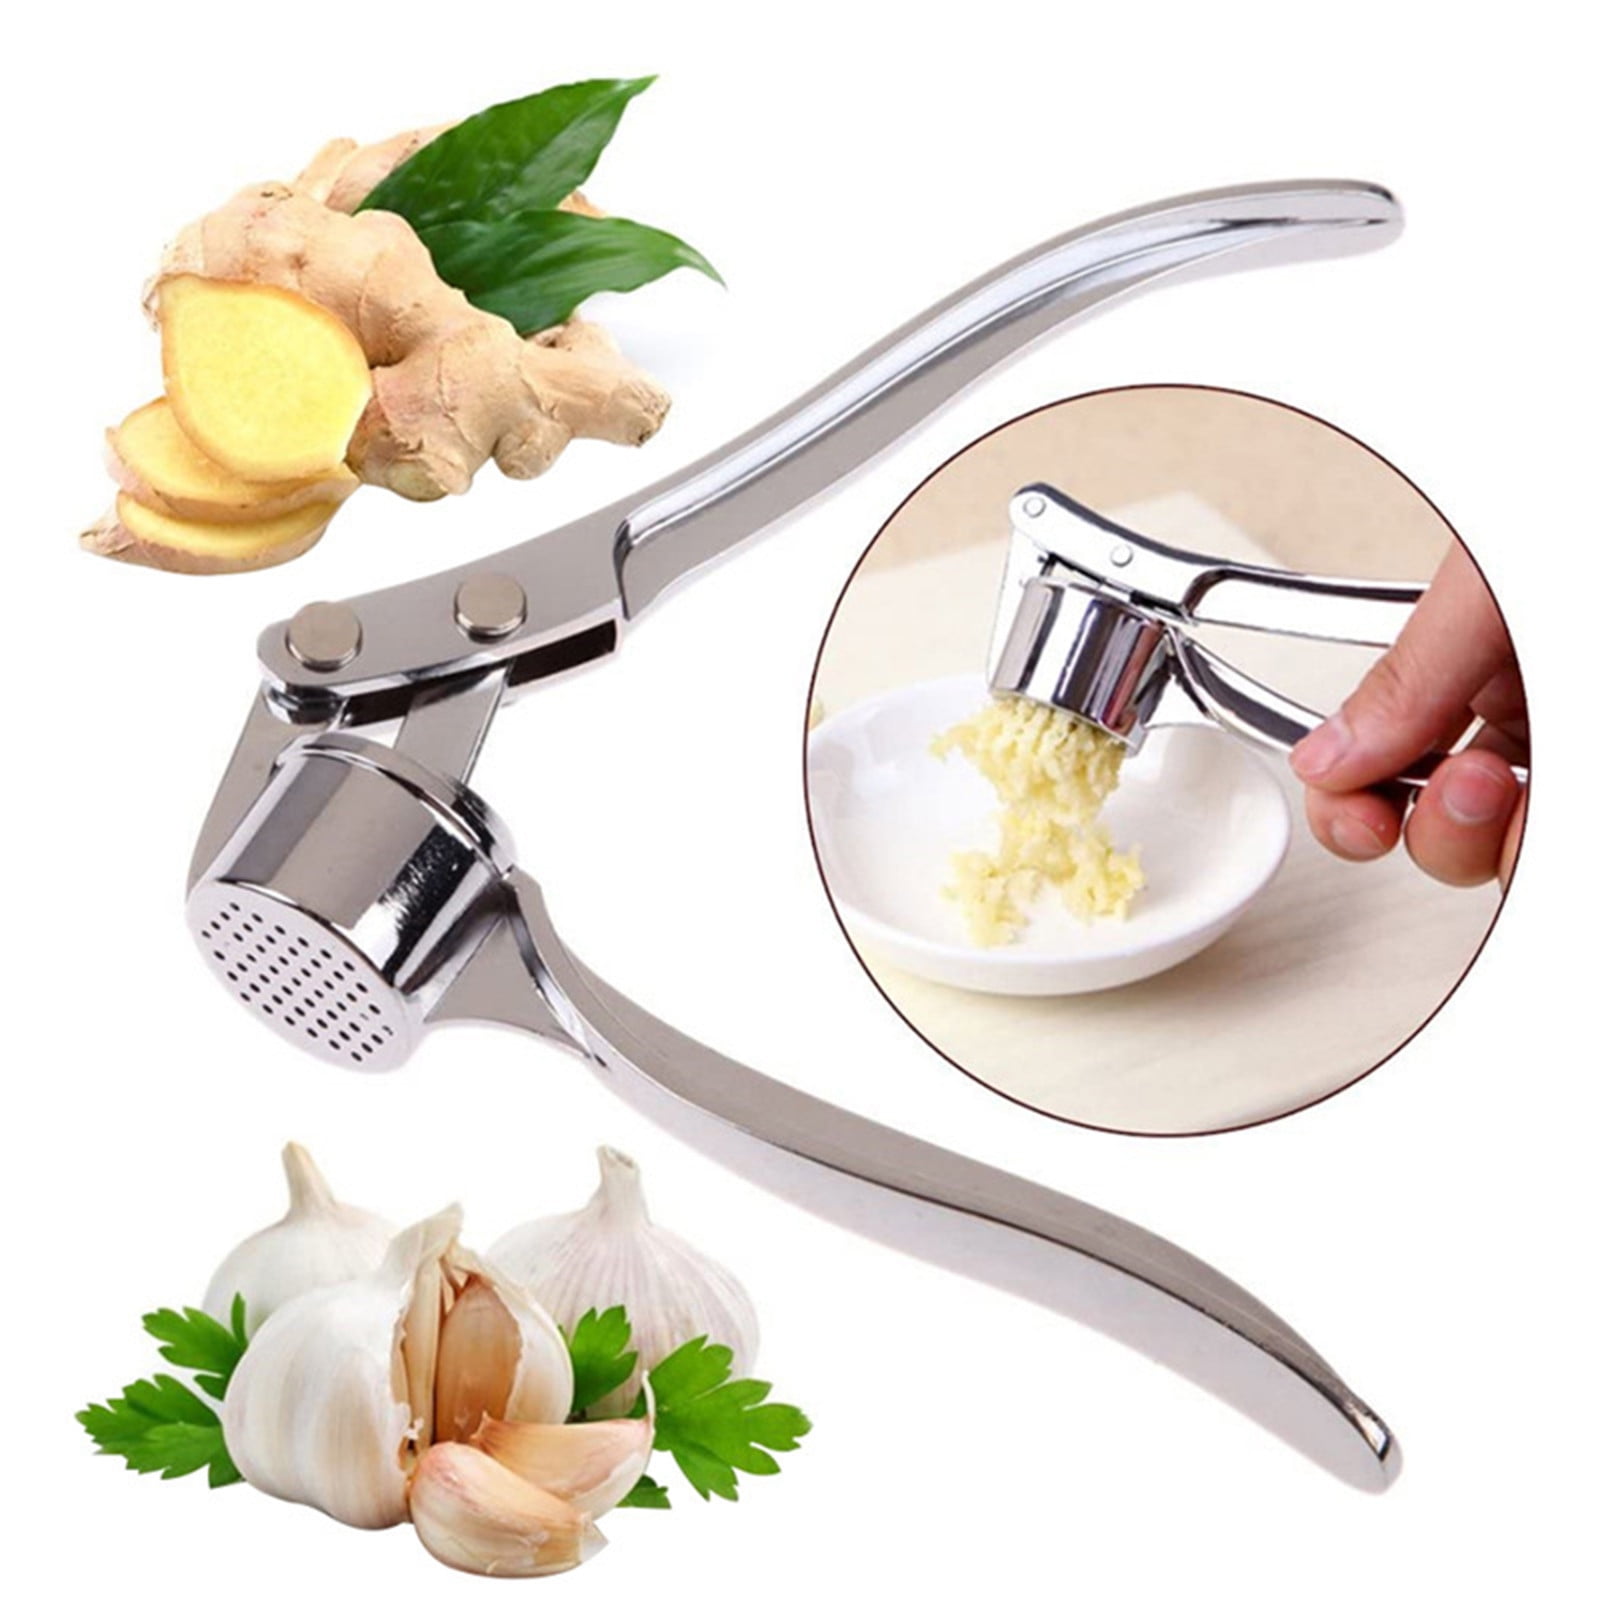 Aoksee Kitchen Organization Stainless Steel Garlic Press Crusher Squeezer Masher Home Kitchen Mincer Tool Cooking Gifts for Her on Clearance, Size